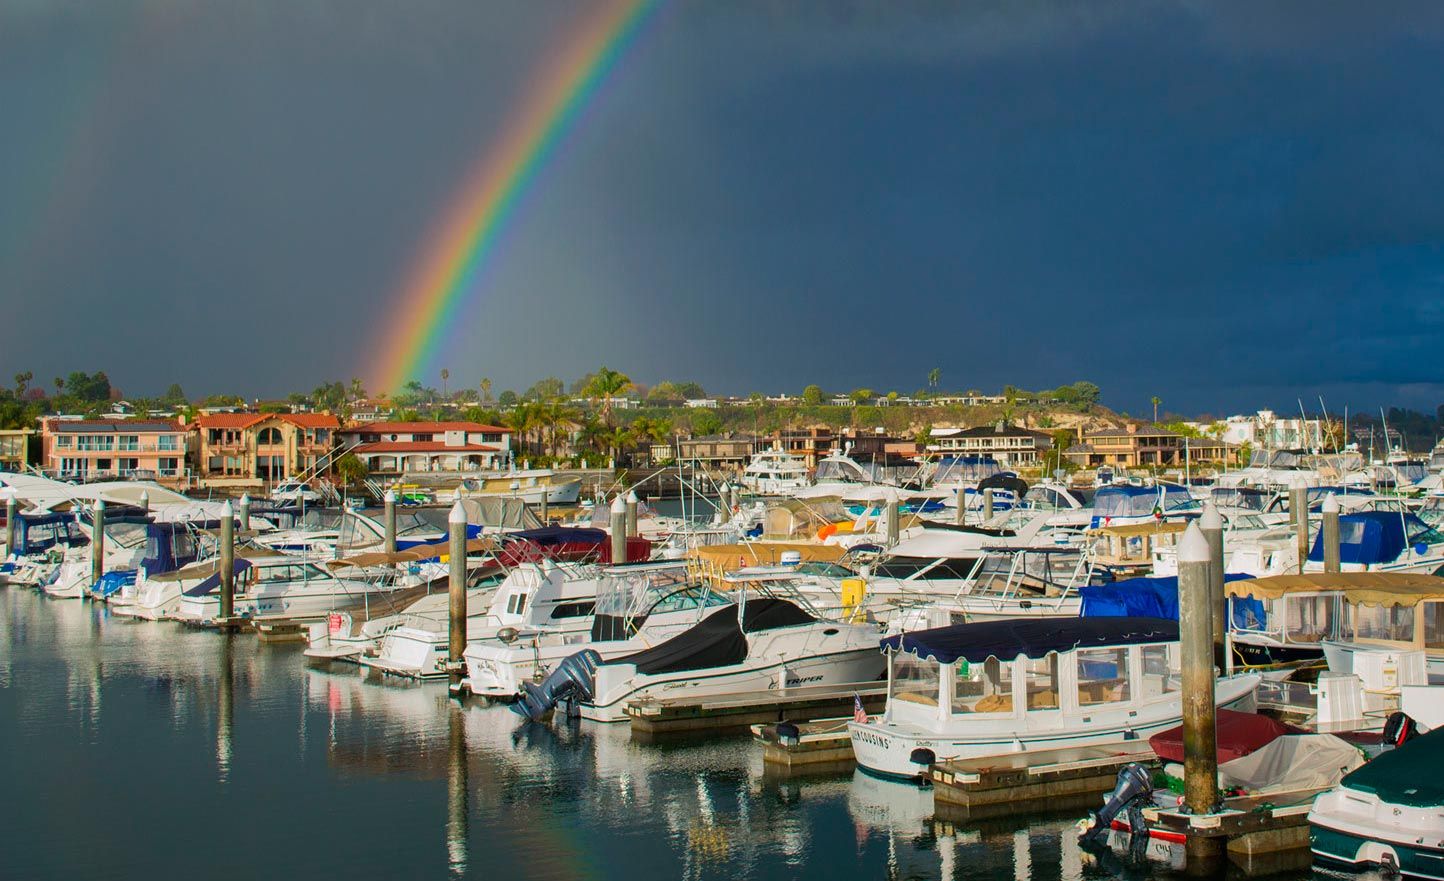 View of the marina looking toward the channel with a rainbow in the background